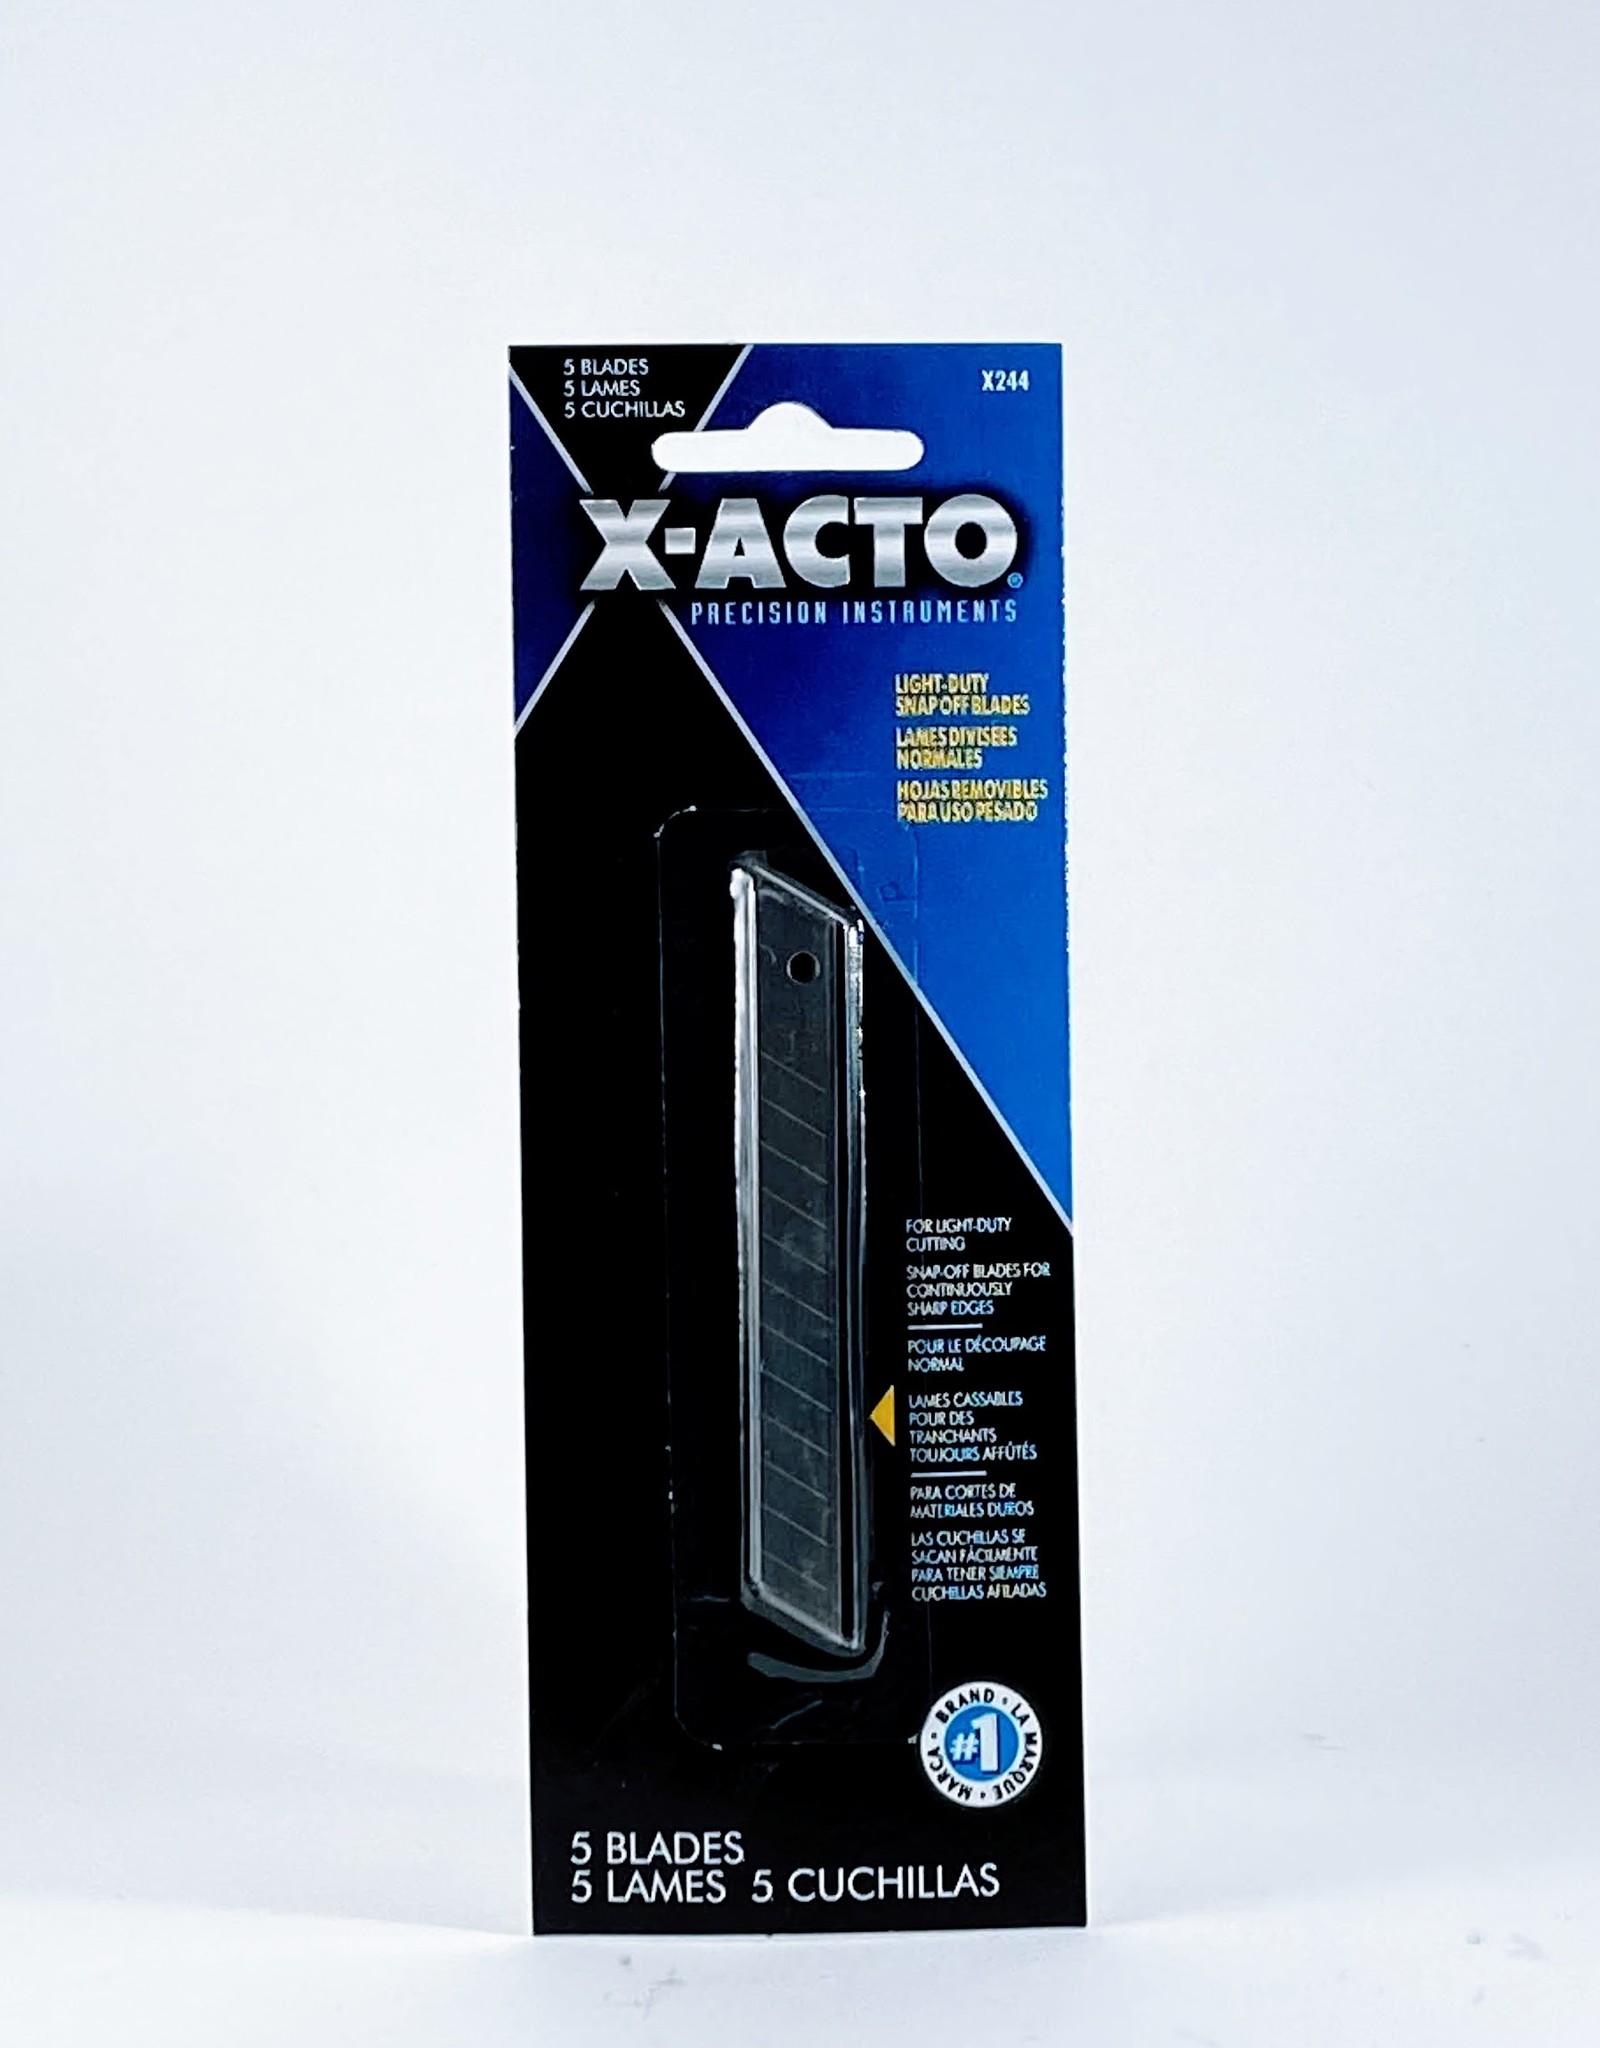 X-Acto X5282 Basic Utility Knife Set- Carry Chest-14 Piece - Surry General  Store